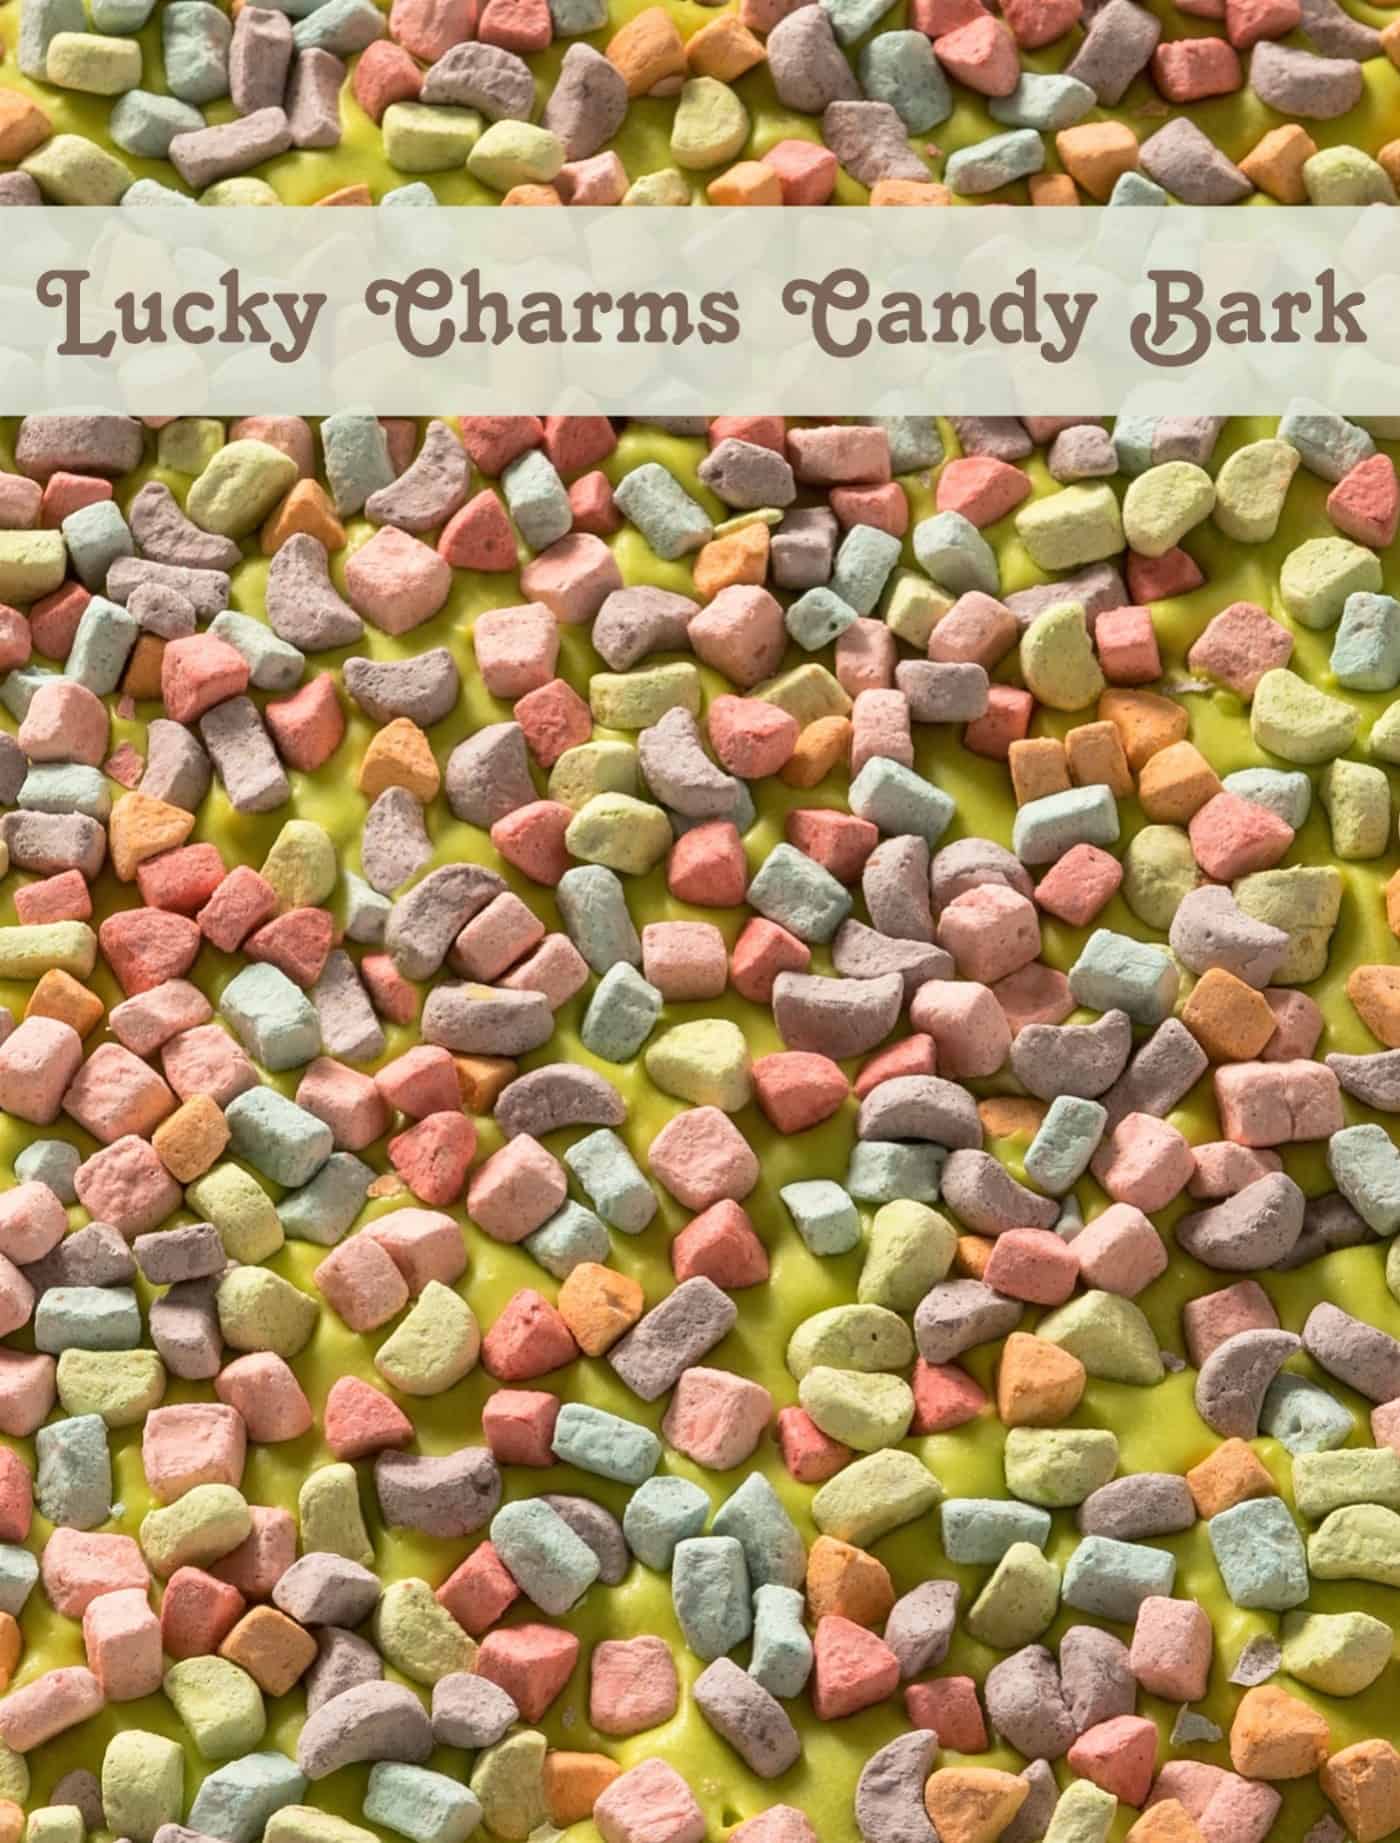 Learn how to make a delicious candy bark using Lucky Charms (just the marshmallows) and candy melts. This dessert is easy and delicious!